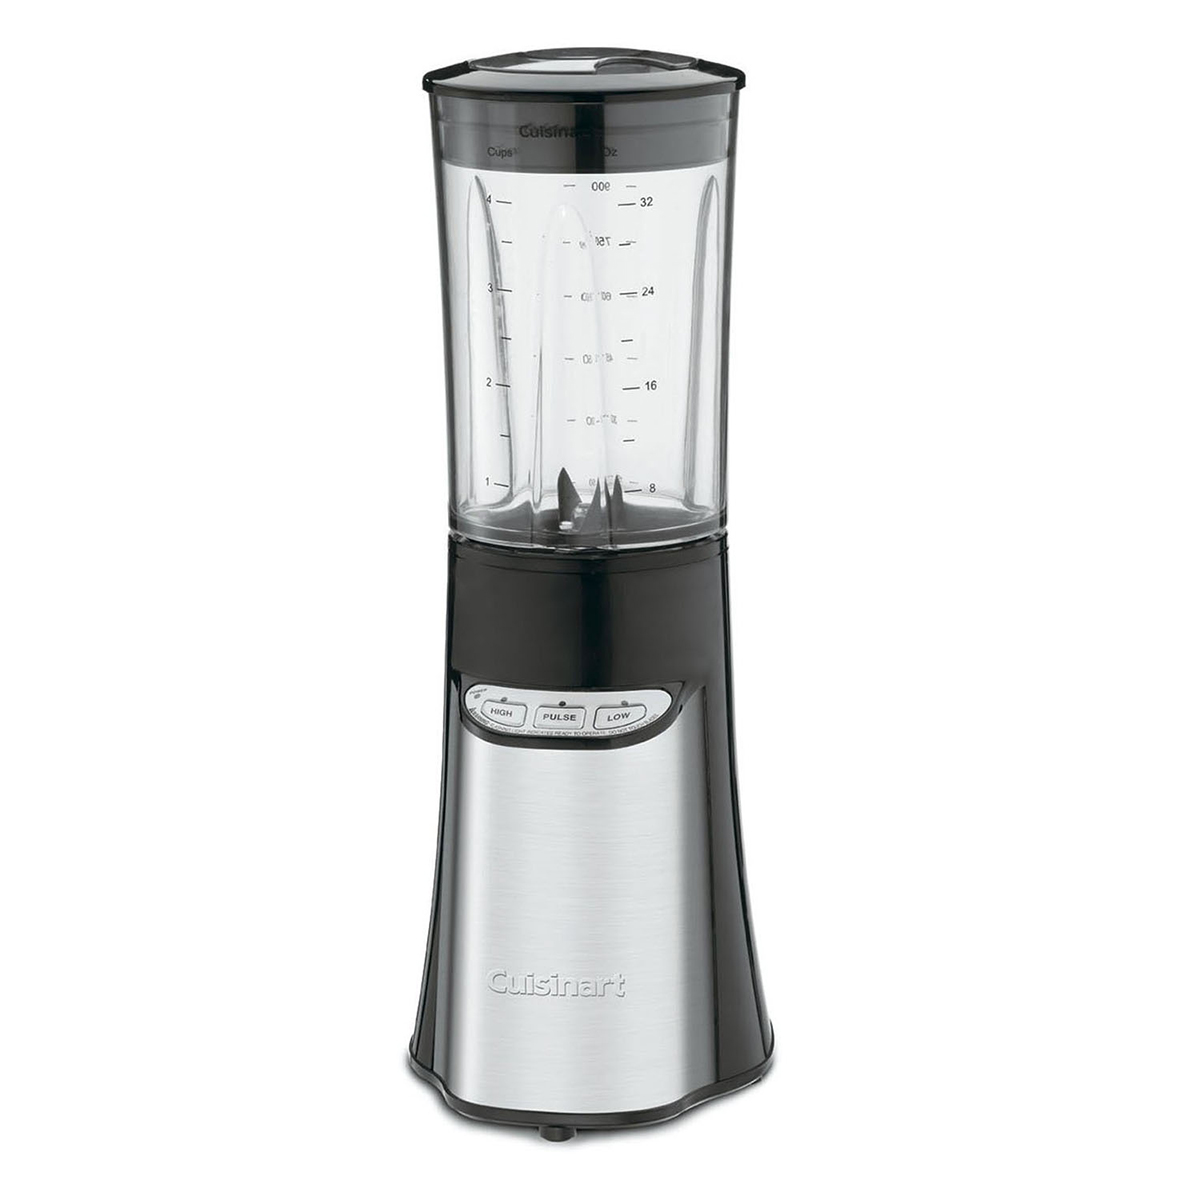 Cuisinart(R) Compact Portable Blending/Chopping System